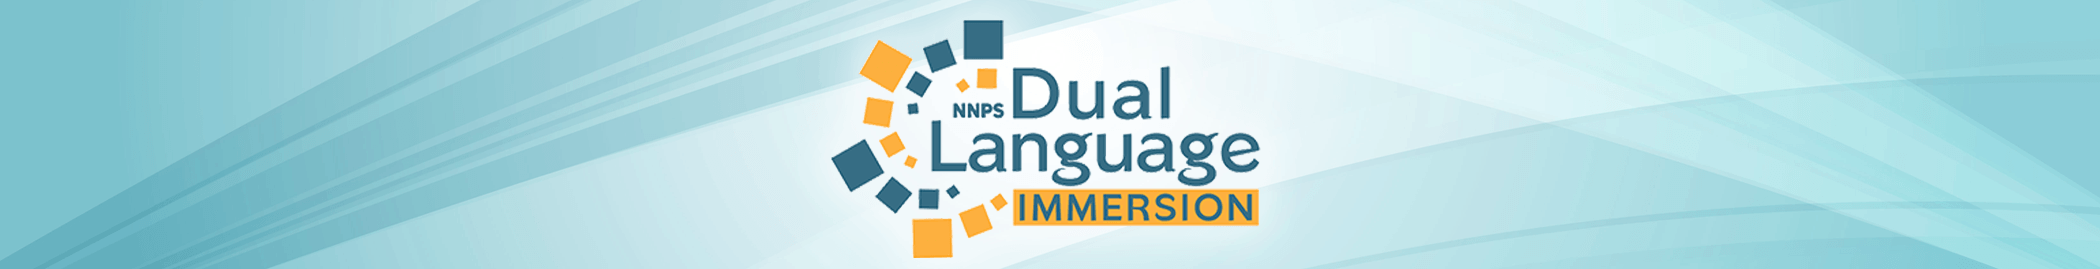 Dual Language Immersion at NNPS